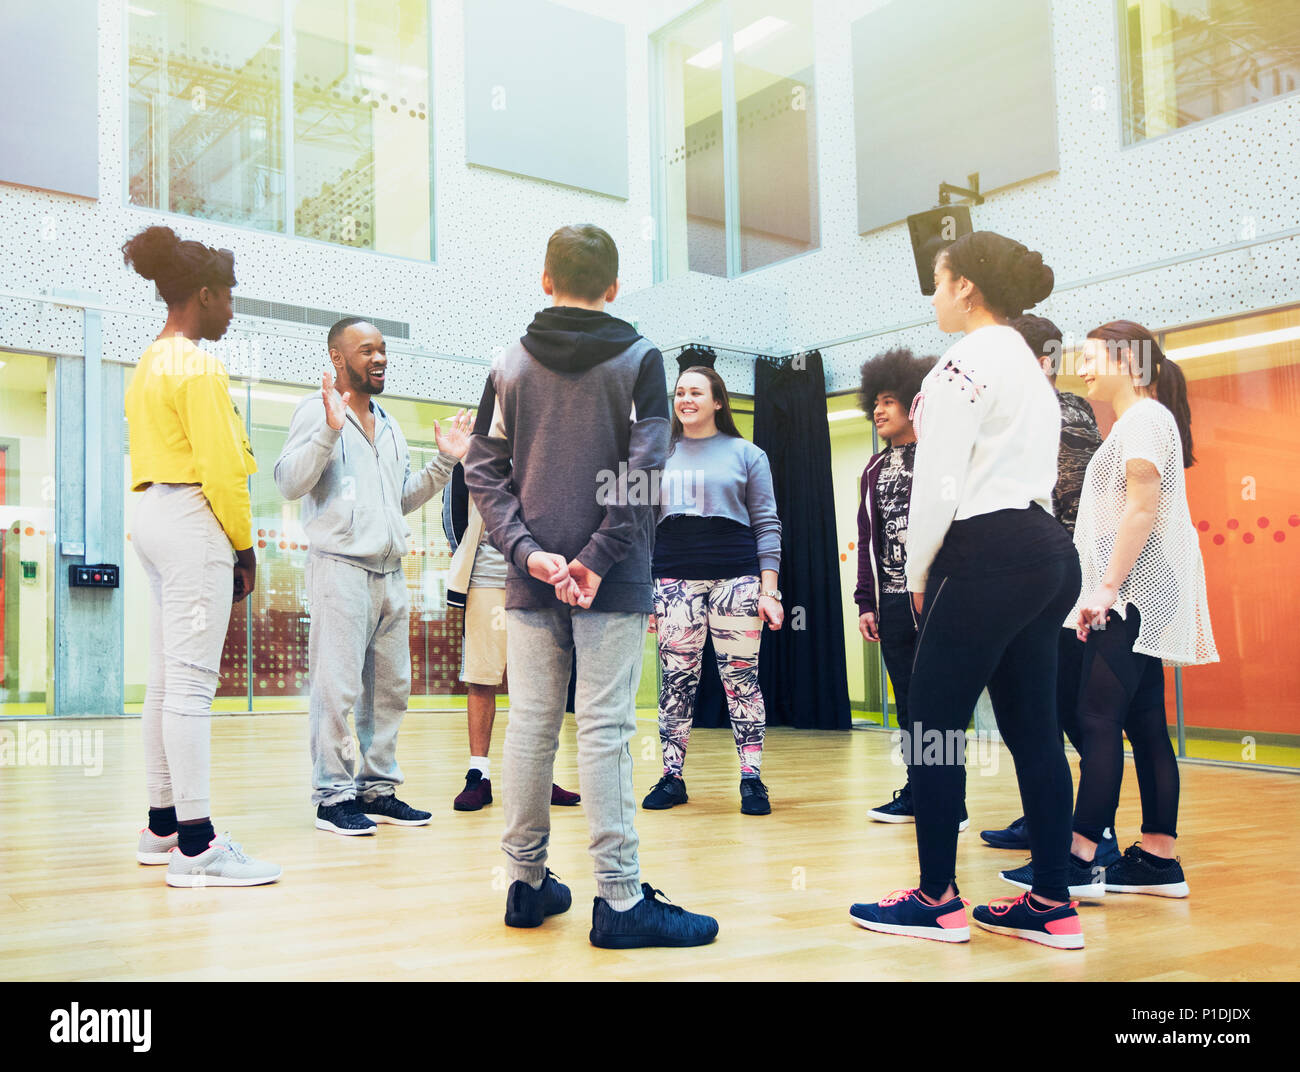 Teenage students listening to male instructor in dance class studio Stock Photo